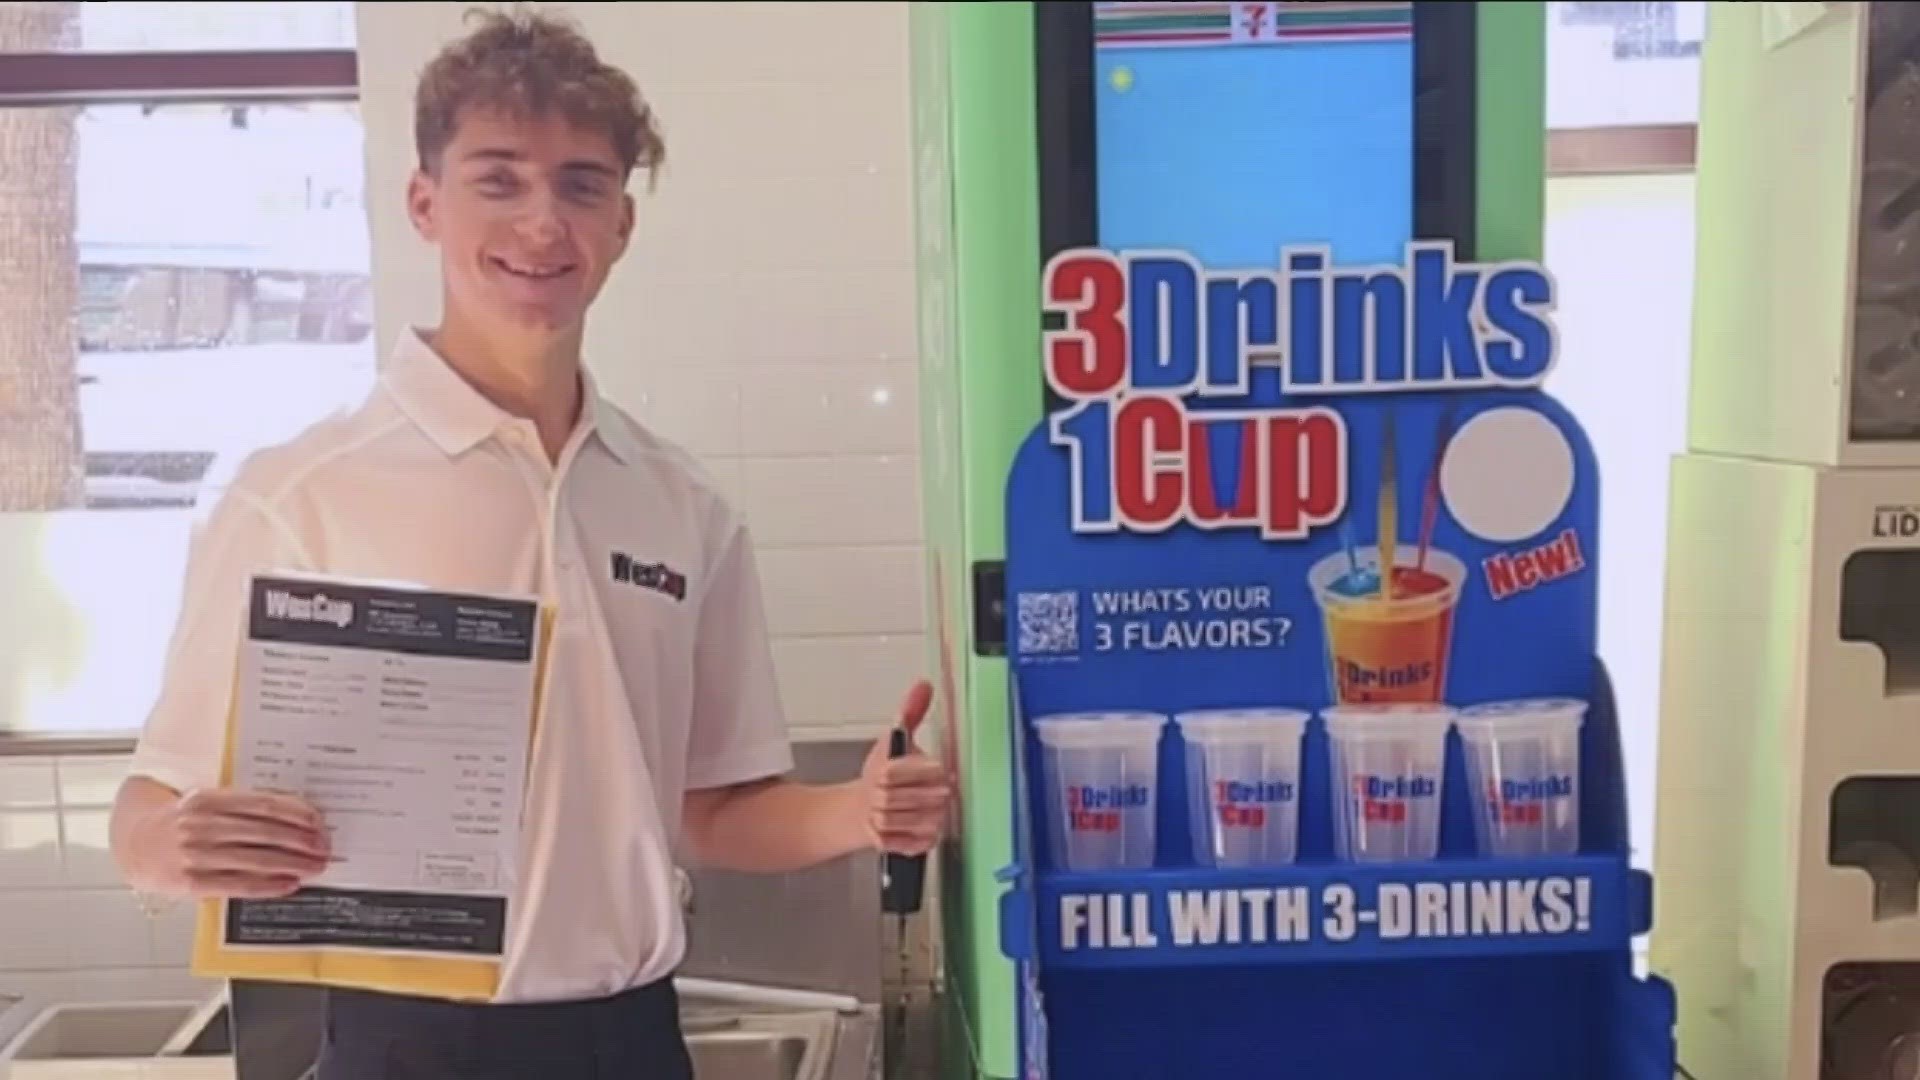 WesCups are available at Belmont Park and thirty-three 7/11 stores.